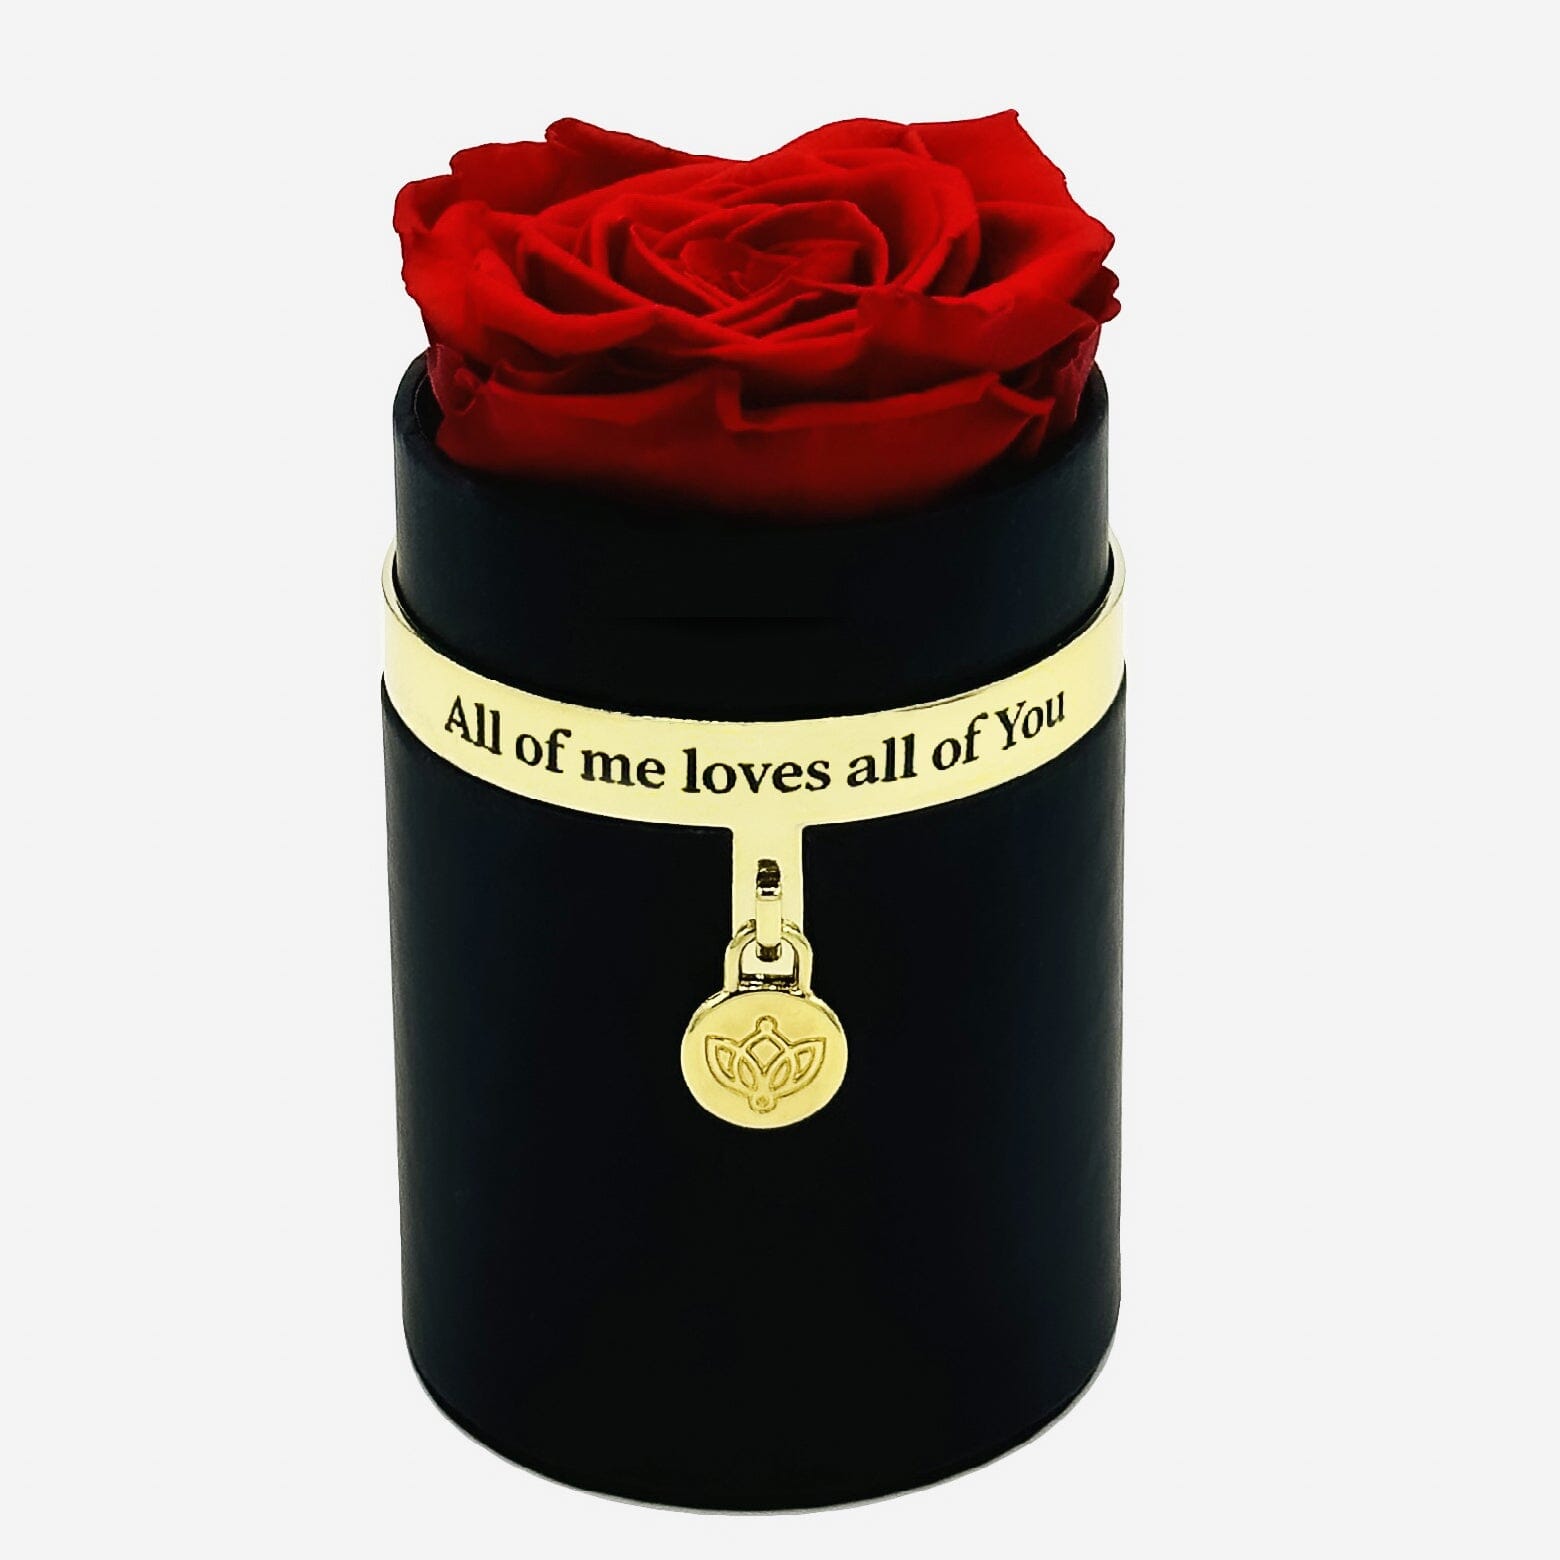 One in a Million™ Round Black Box | All of me loves all of You | Red Rose - The Million Roses